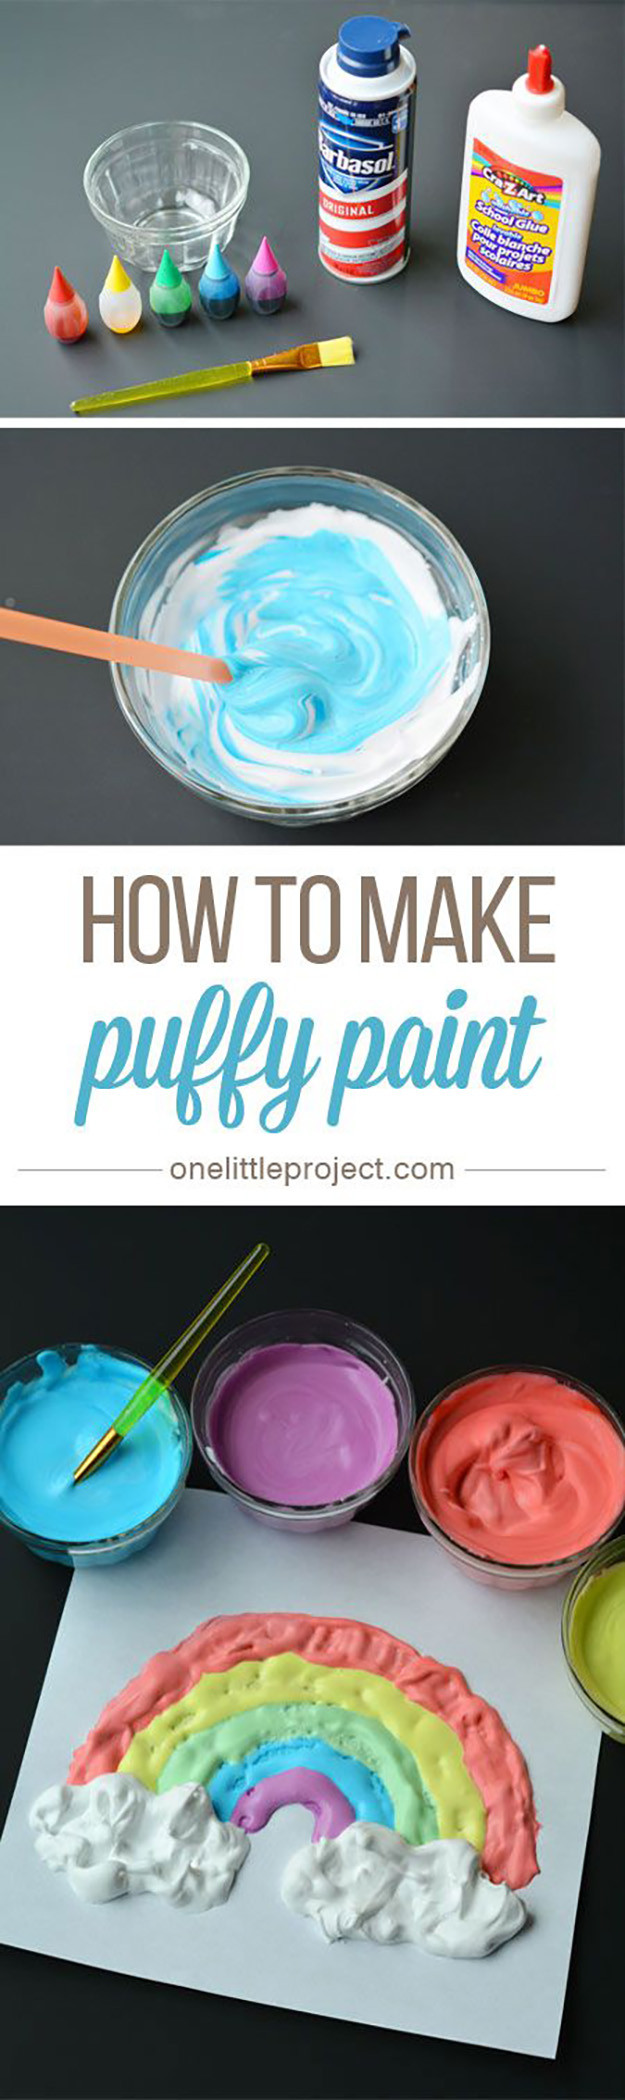 Easy Diy For Kids
 21 DIY Paint Recipes To Make For the Kids